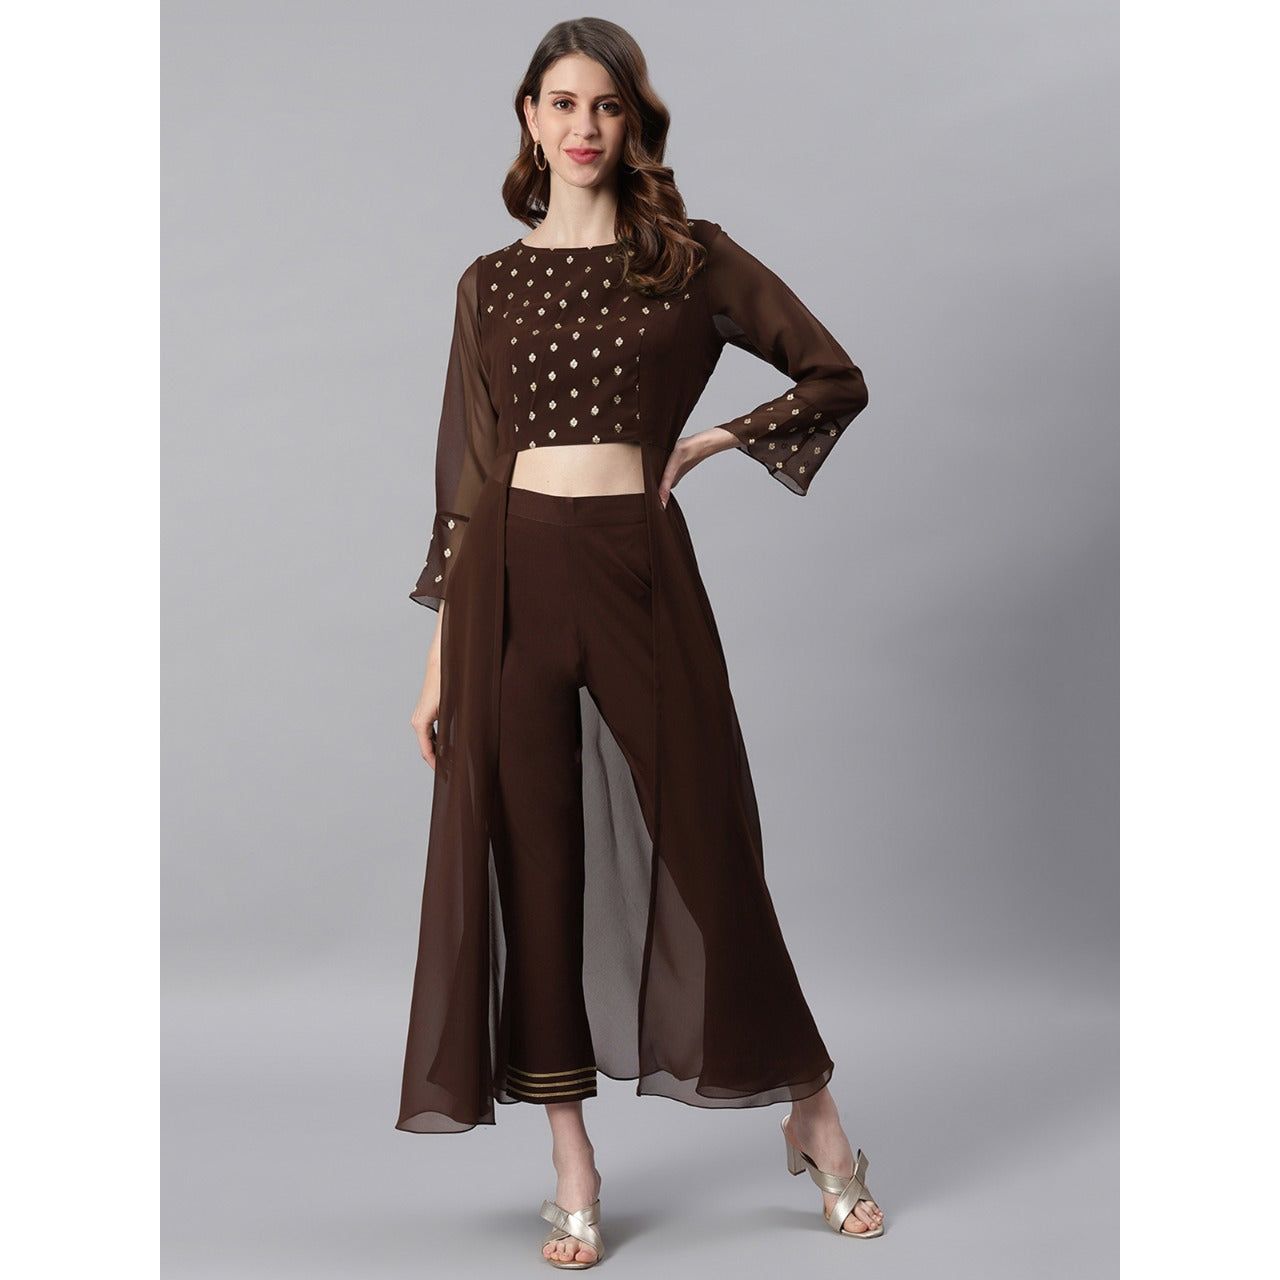 Stunning Brown and Gold 2 Piece Set / Indian Fusion Wear Set